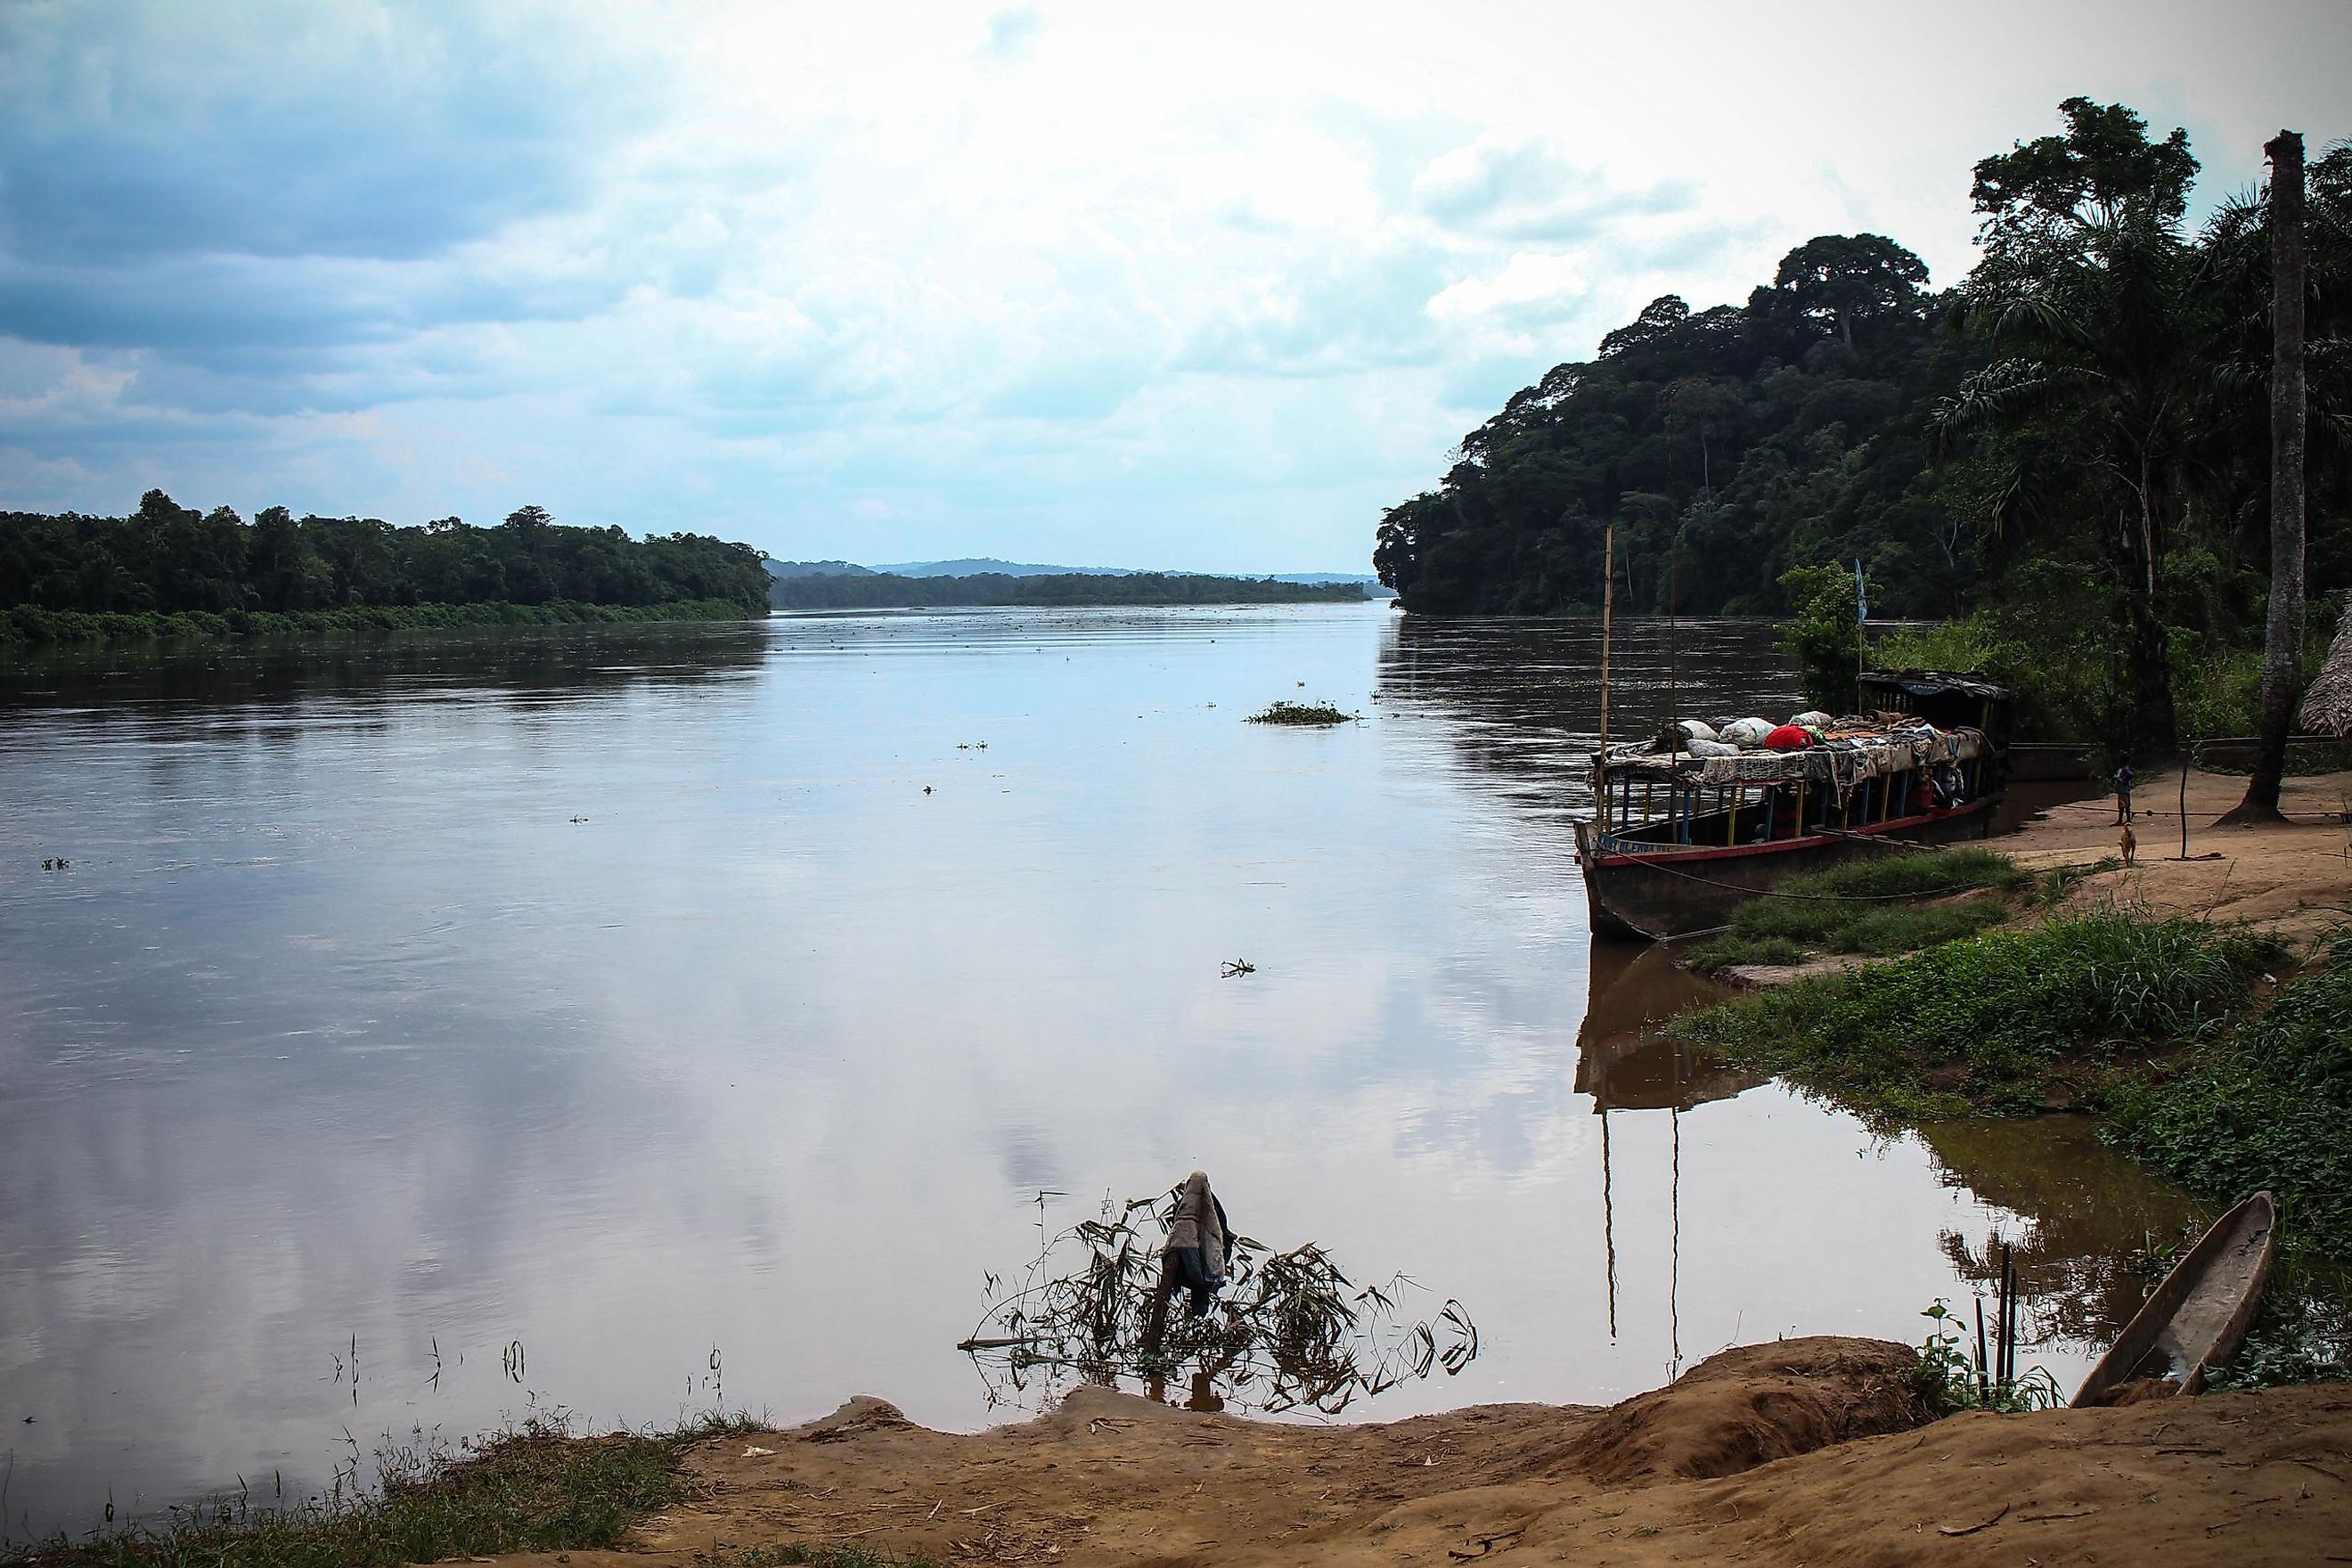 Crossing the Lulua river, a tributary of the Kasai River, in the Democratic Republic of Congo